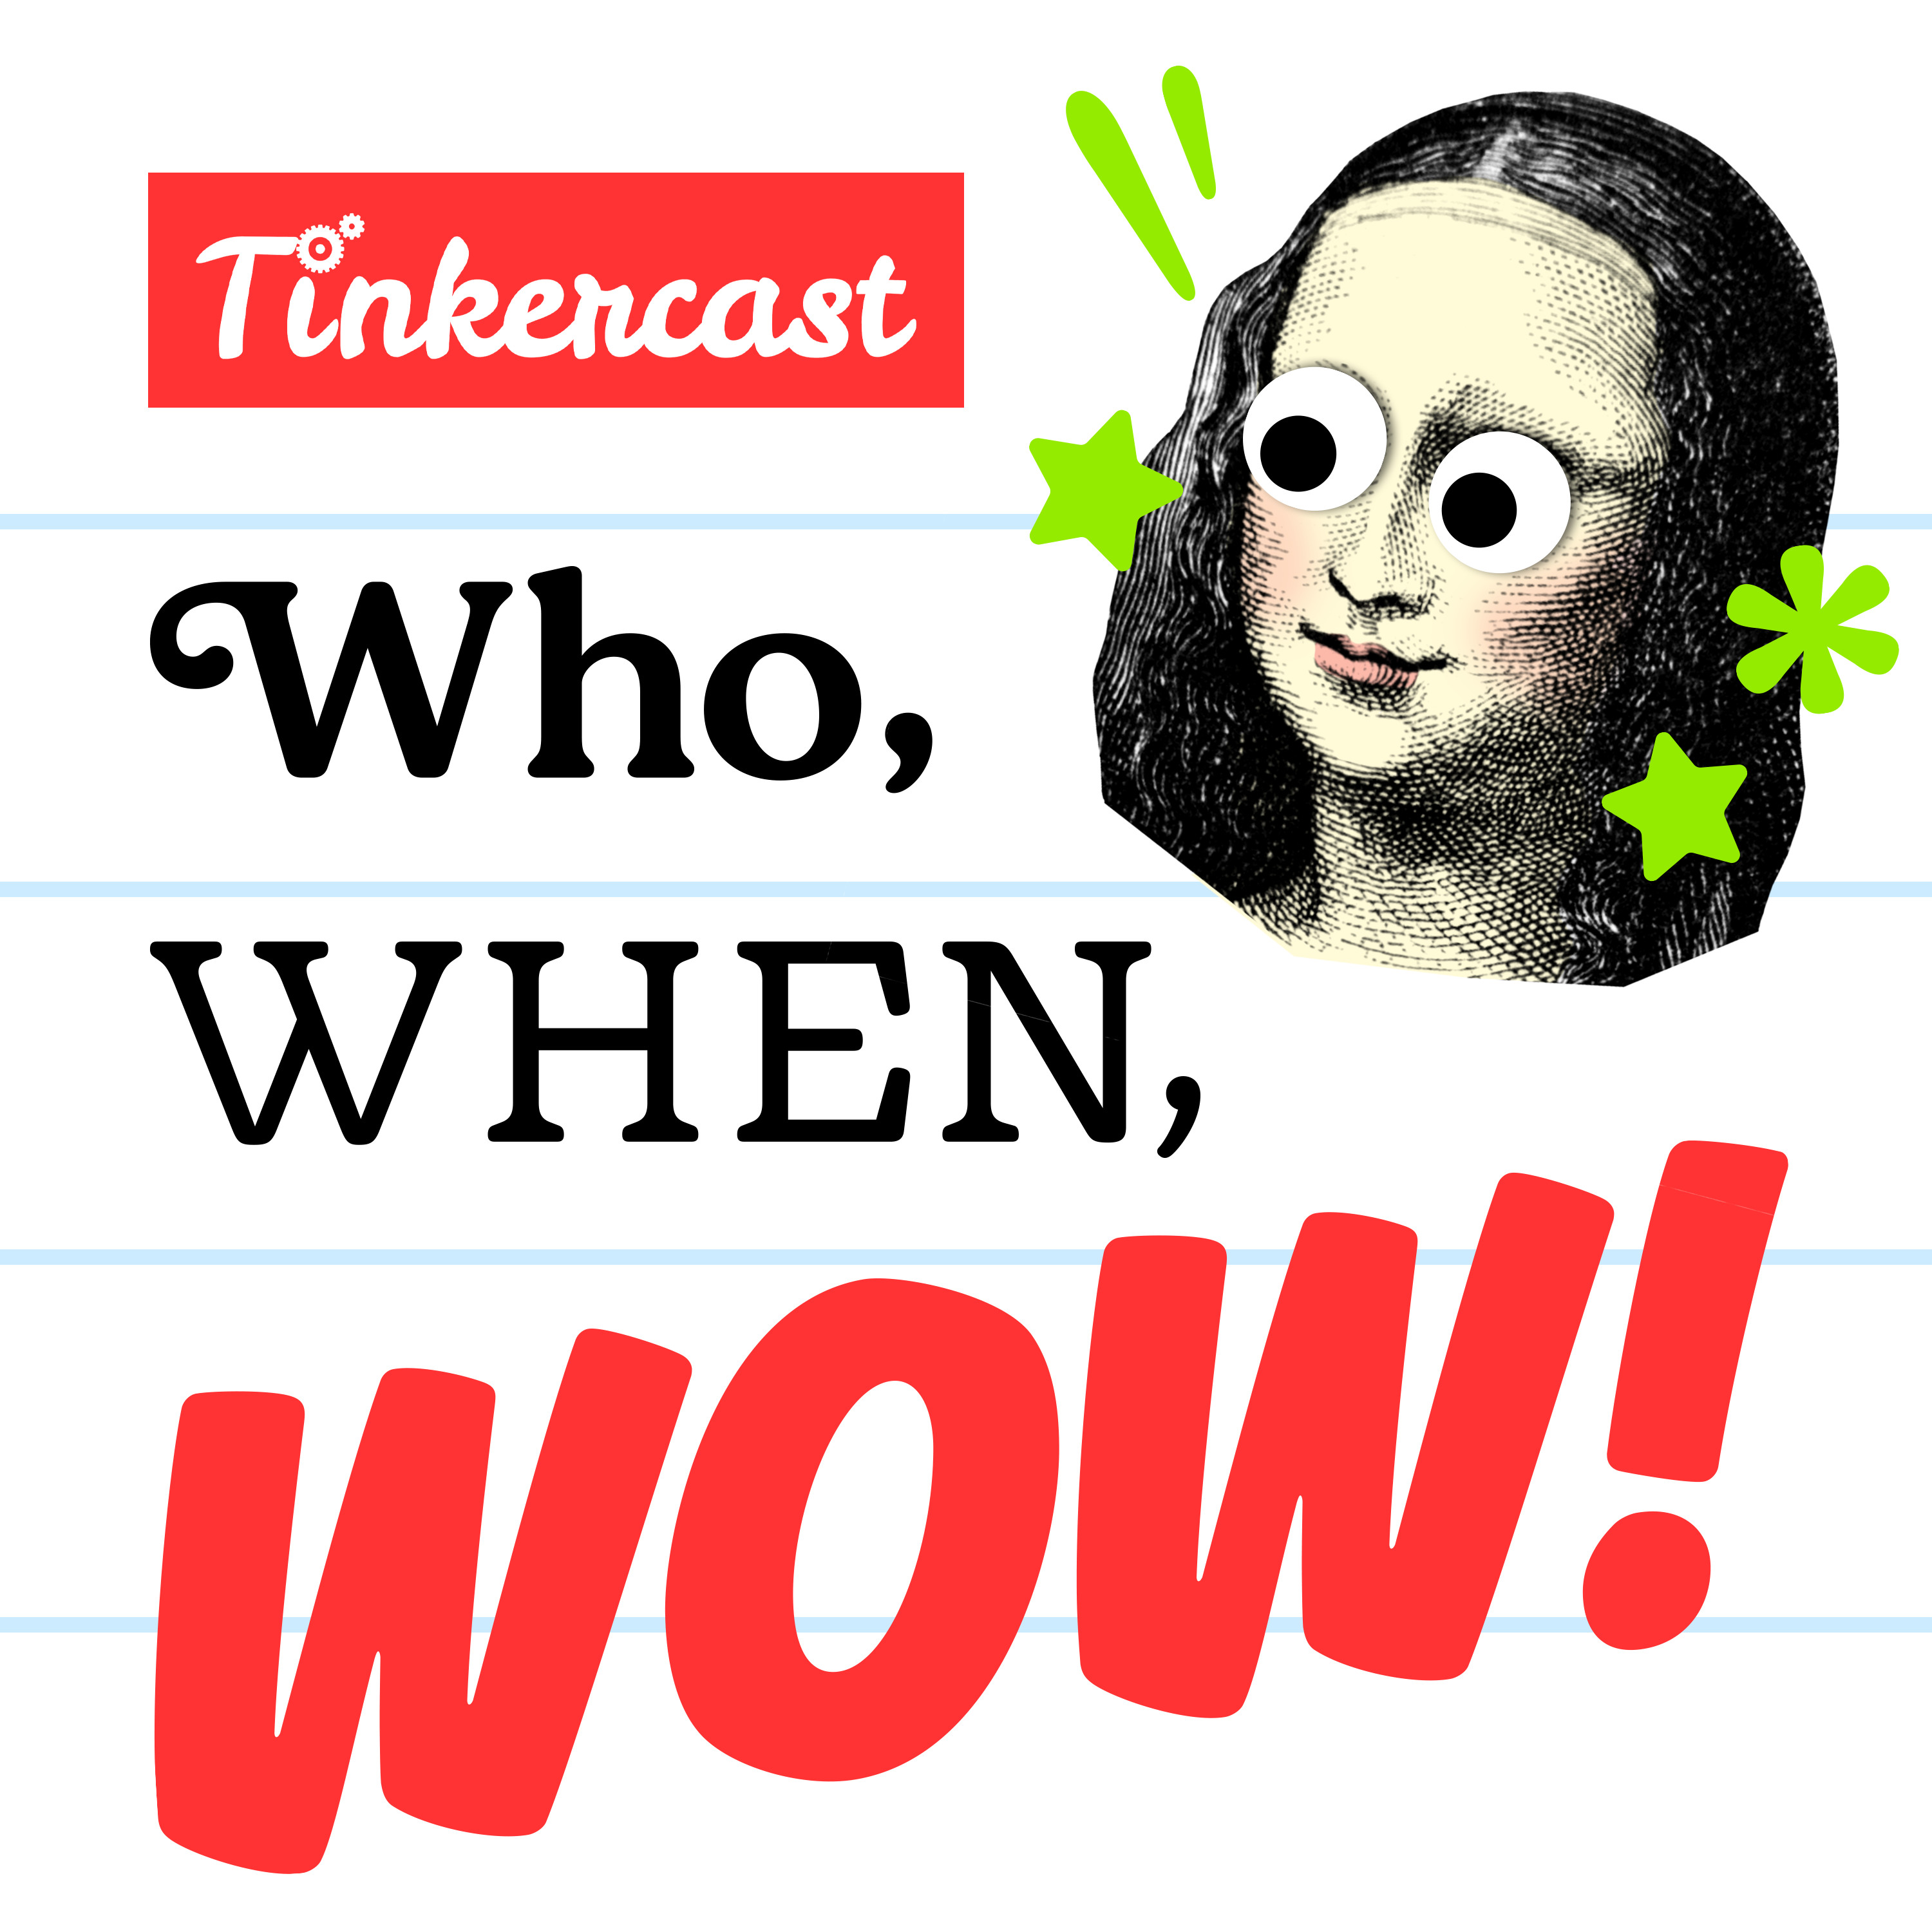 Tinkercast - Who, When, Wow!